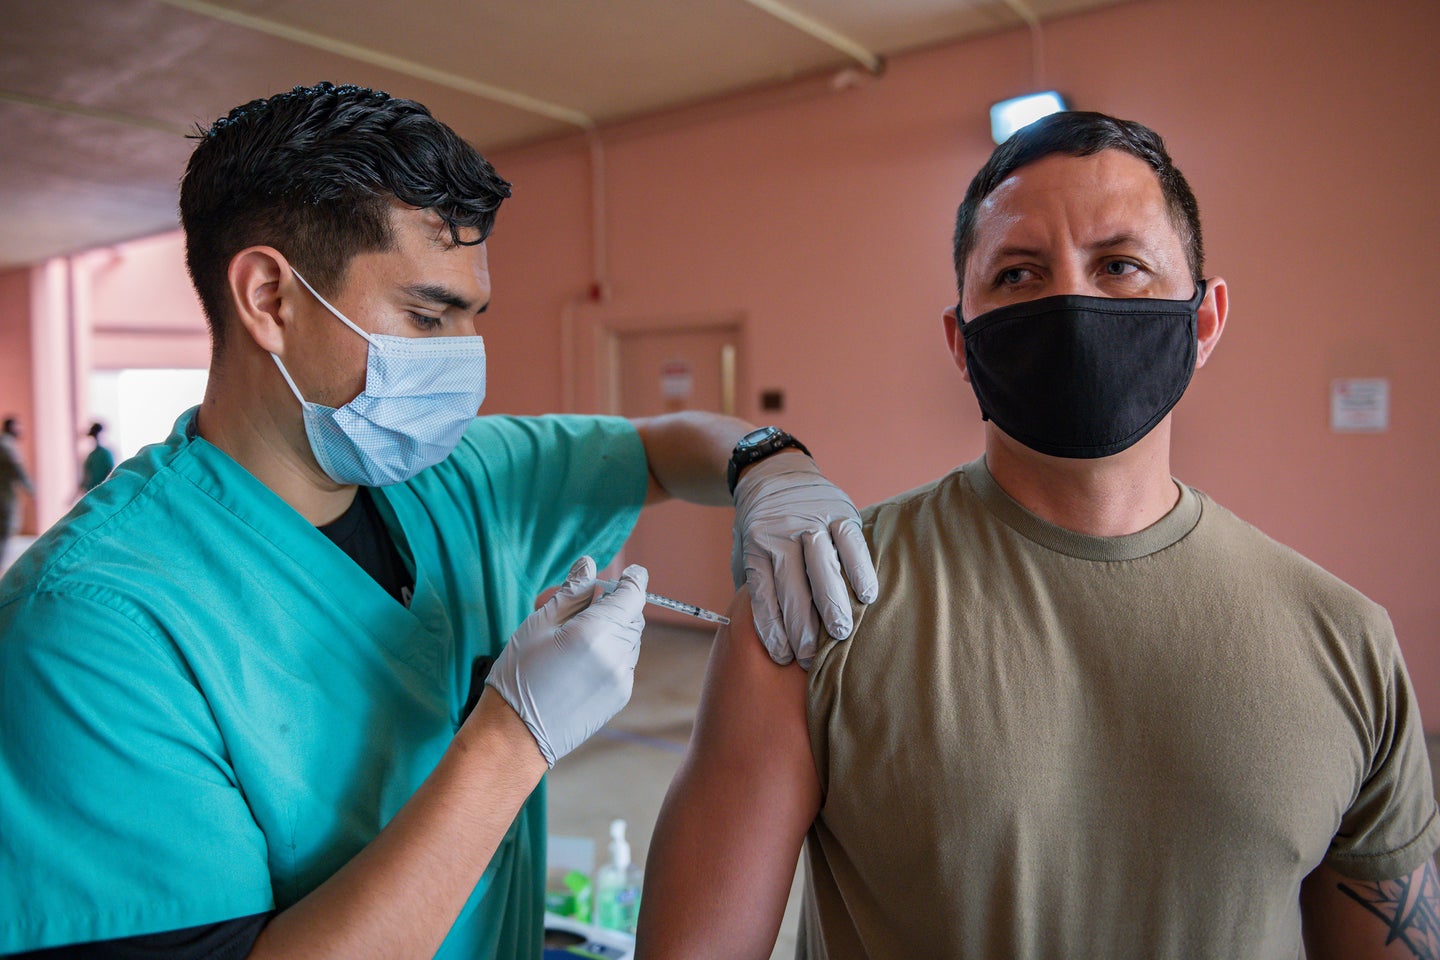 Hawaiian National Guard member gets a COVID-19 vaccine from a health care worker in scrubs